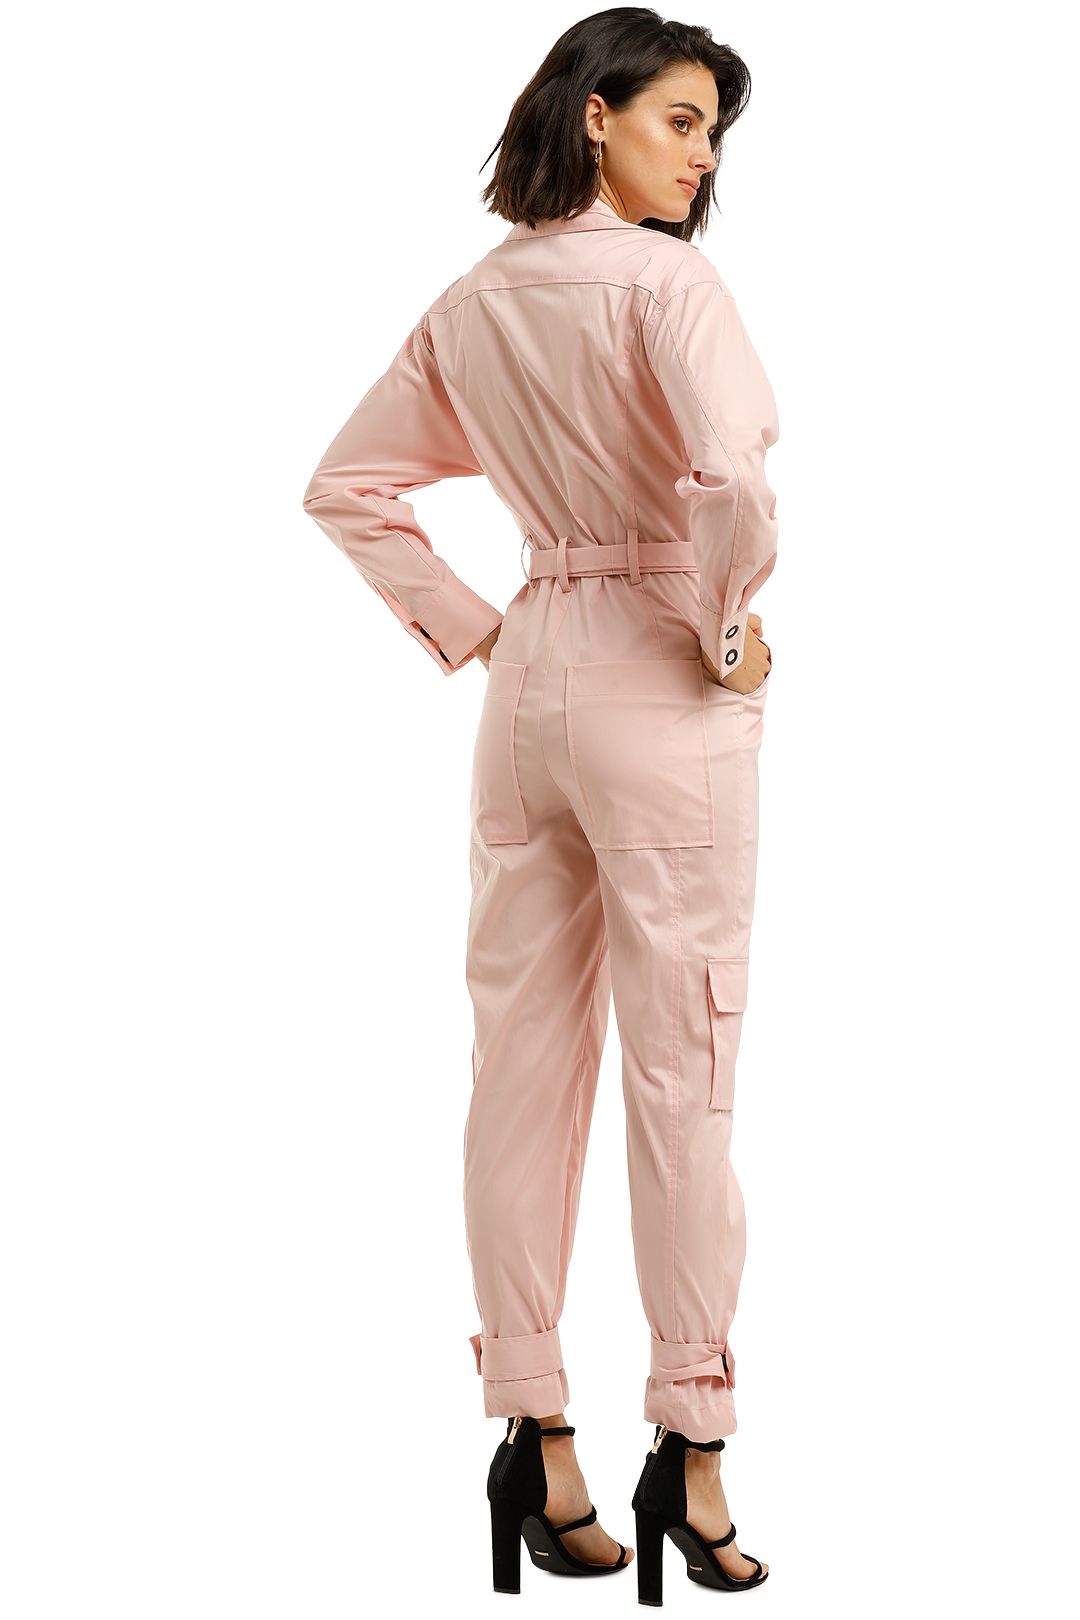 Manning-Cartell-Victory-Lap-Jumpsuit-Pink-Back